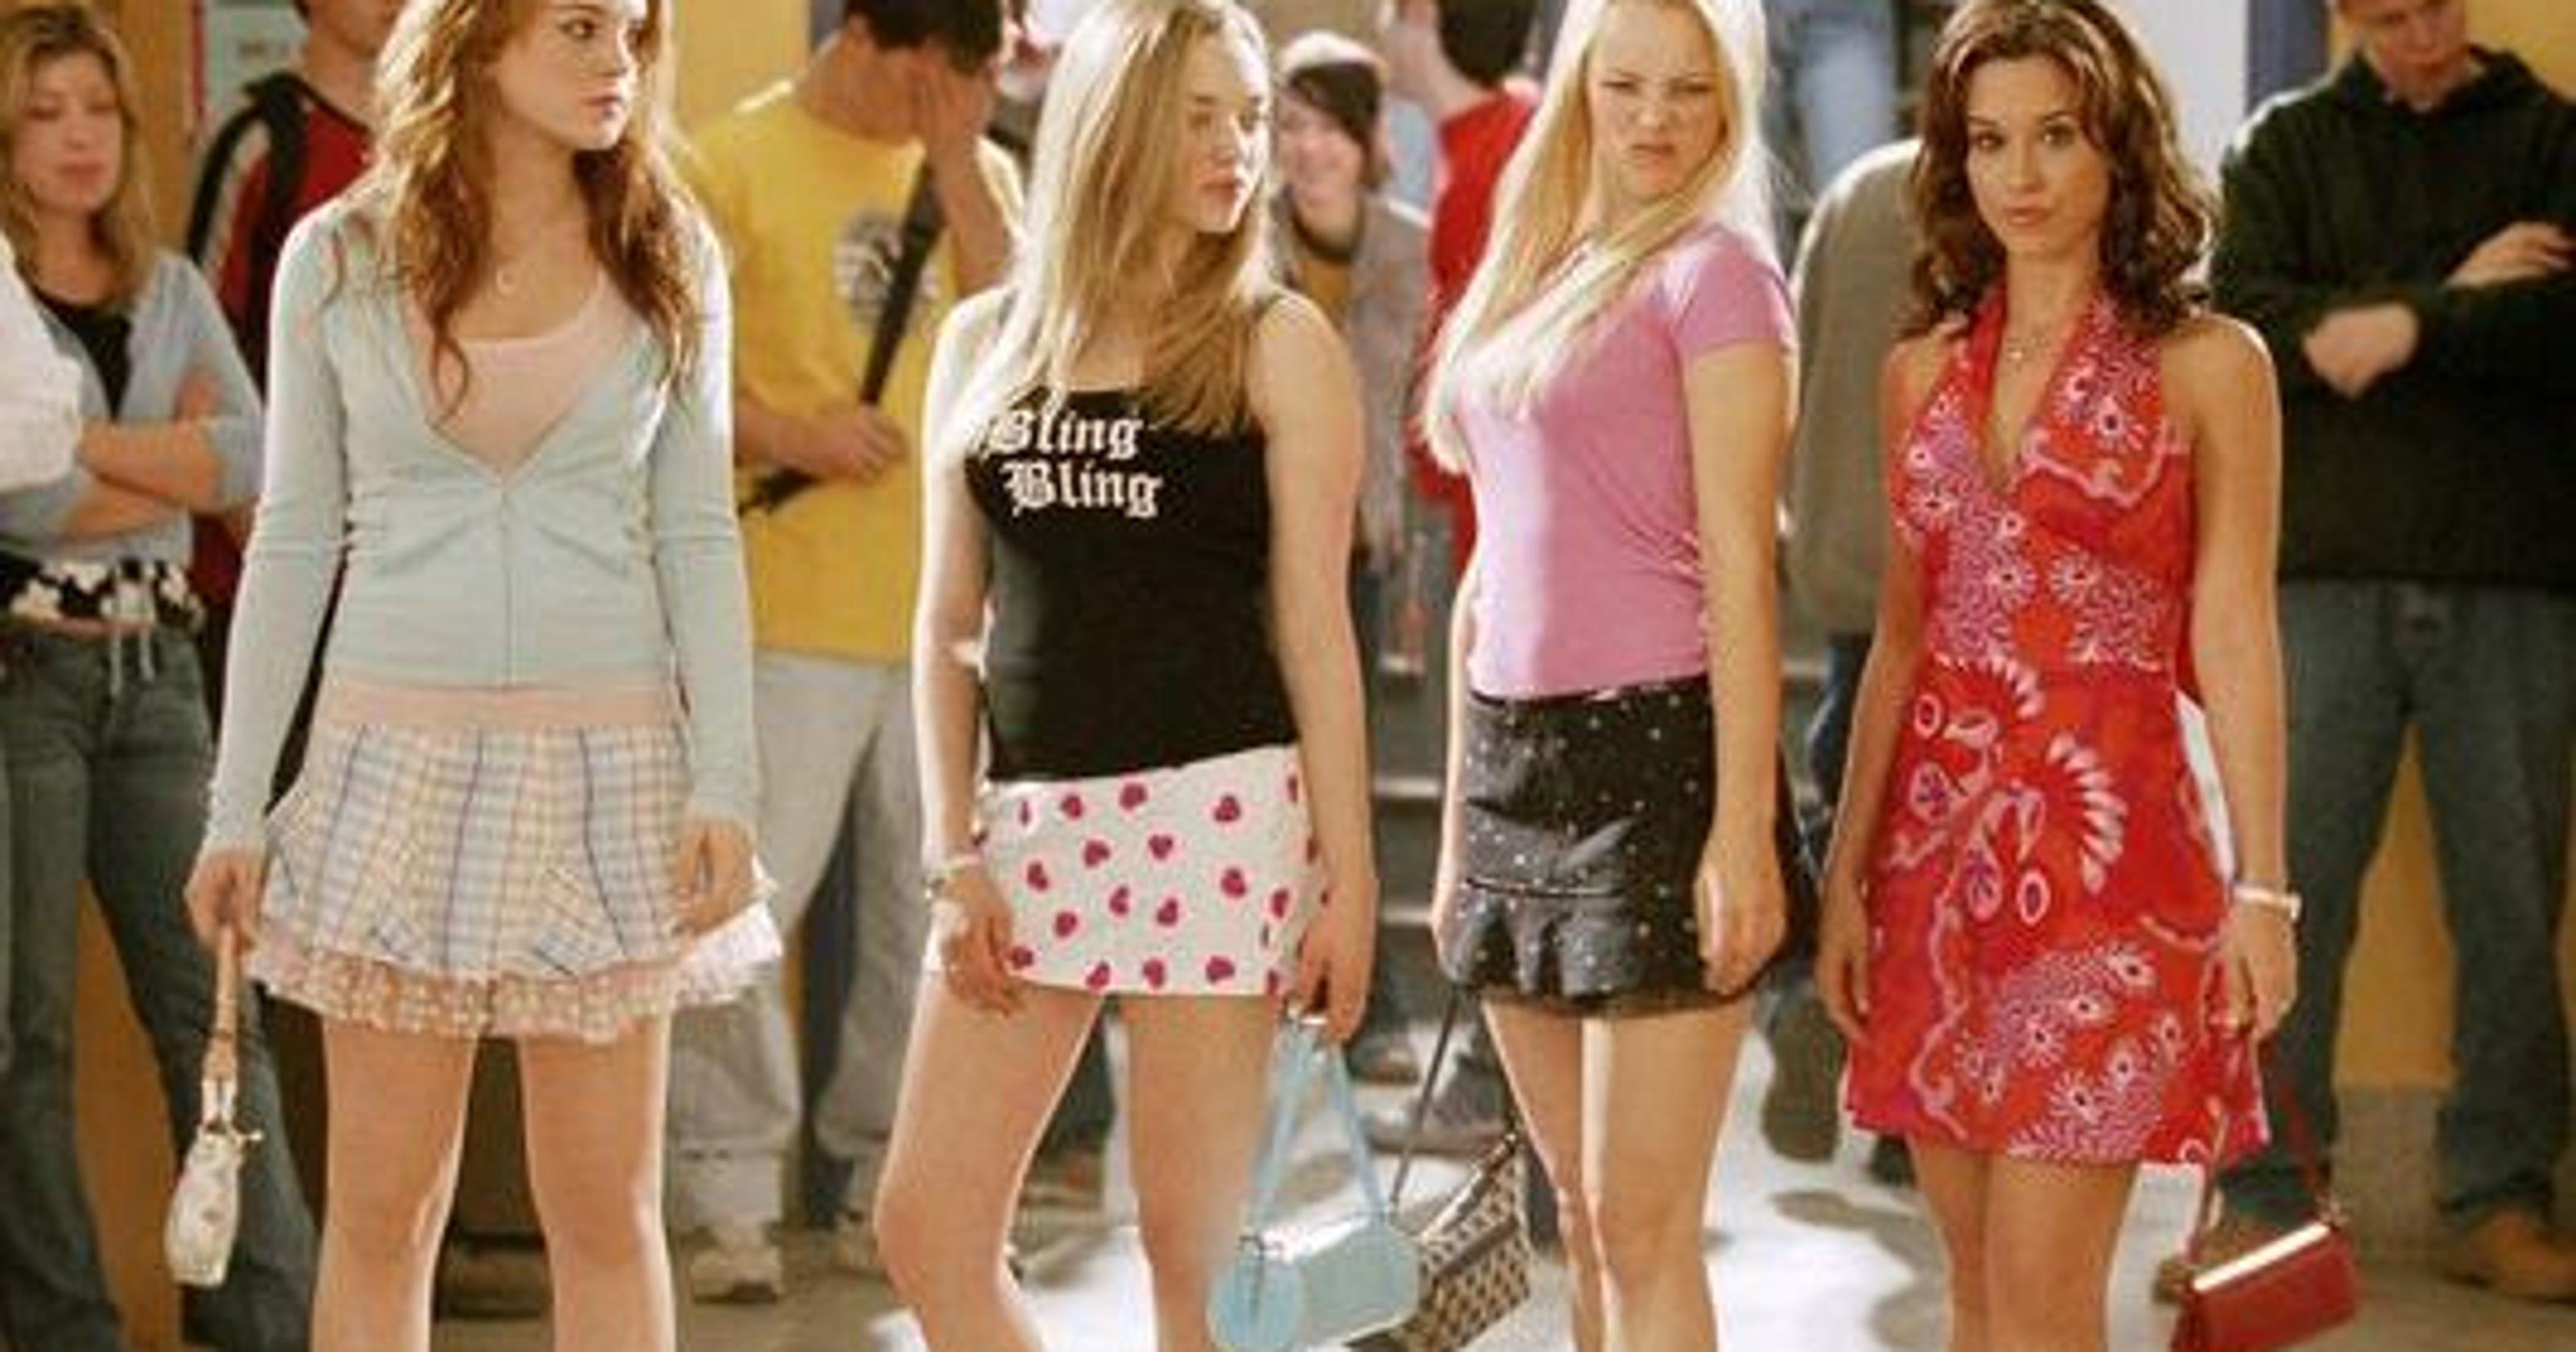 Mean Girls' Day: A definitive ranking of the movie's quotes